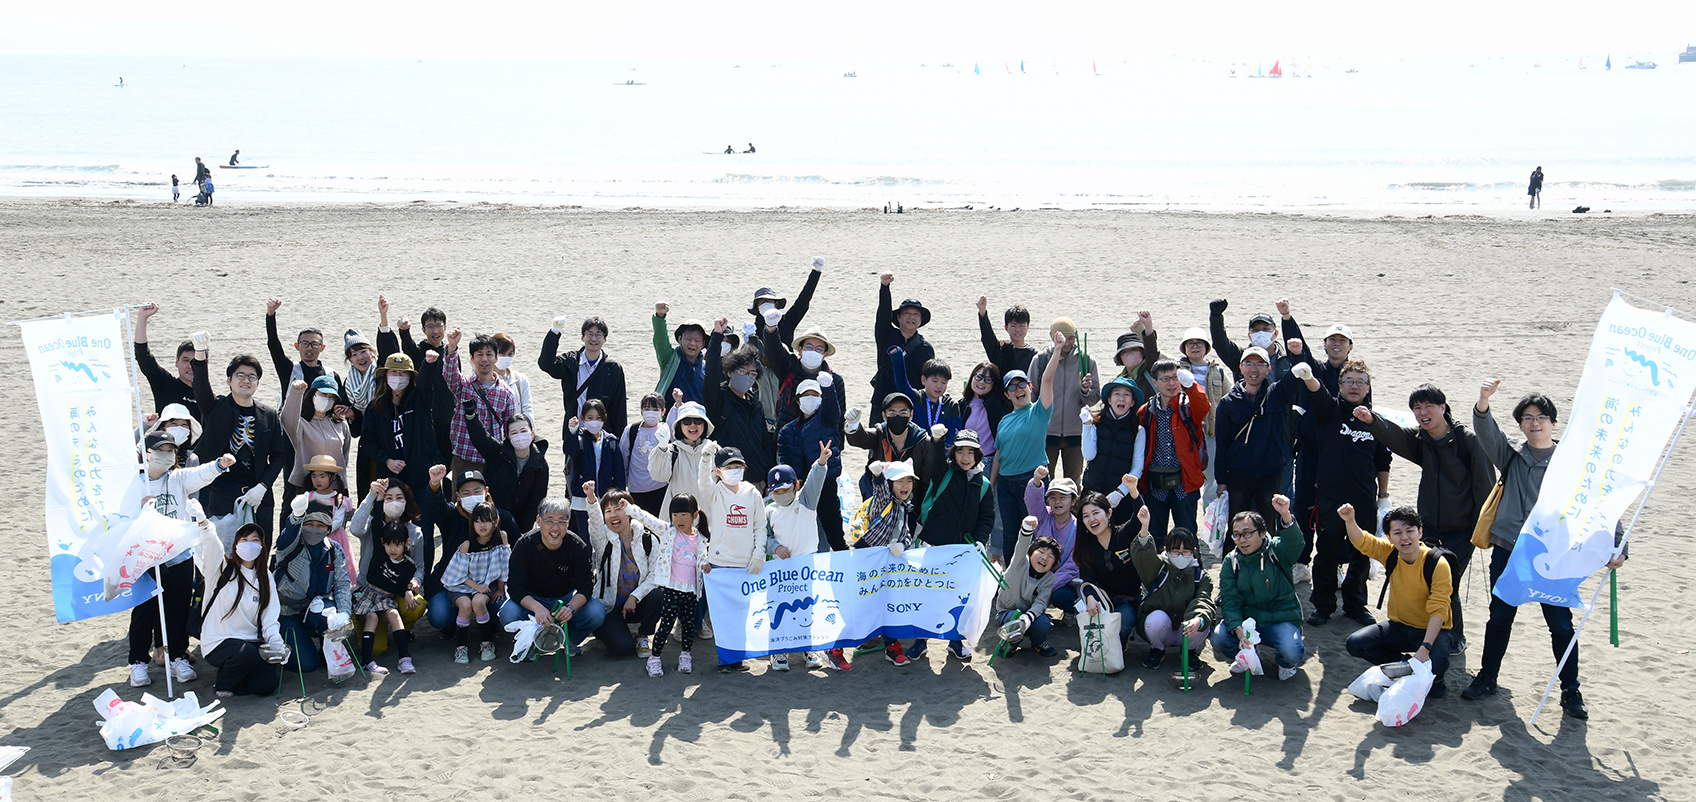 Group photo of people participating in beach cleanup activities at Katase-higashihama beach